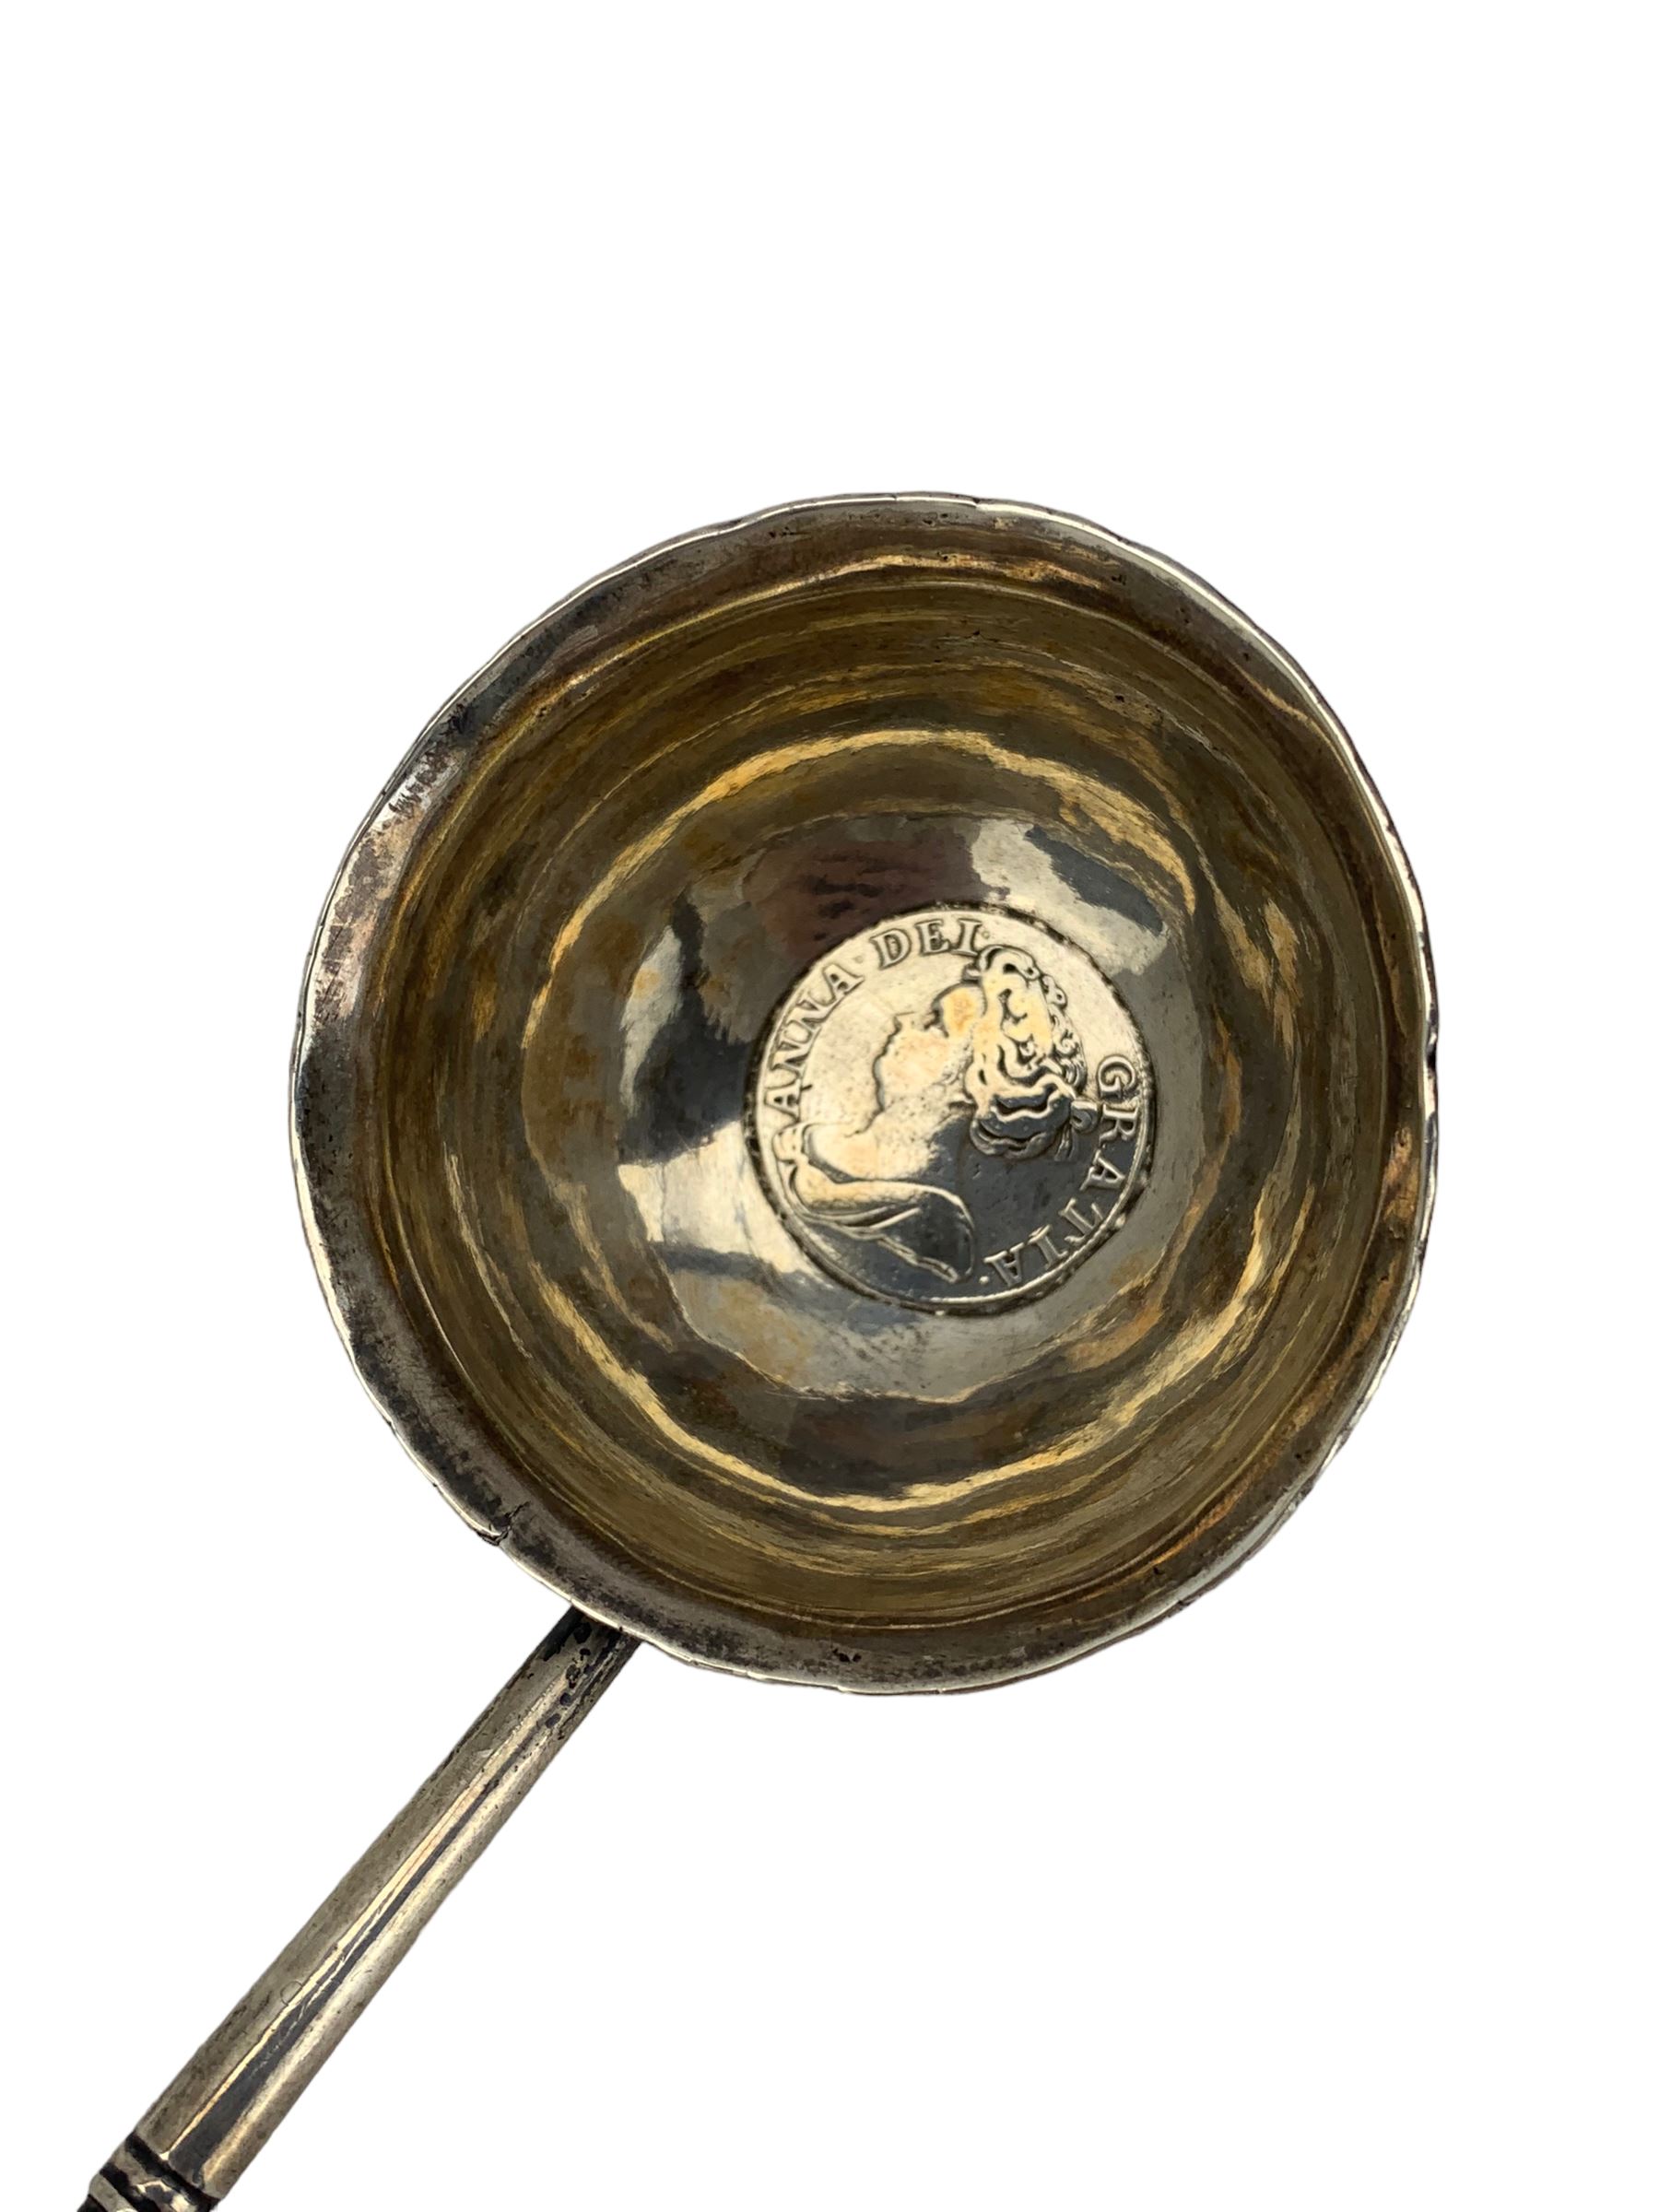 19th century toddy ladle - Image 2 of 3